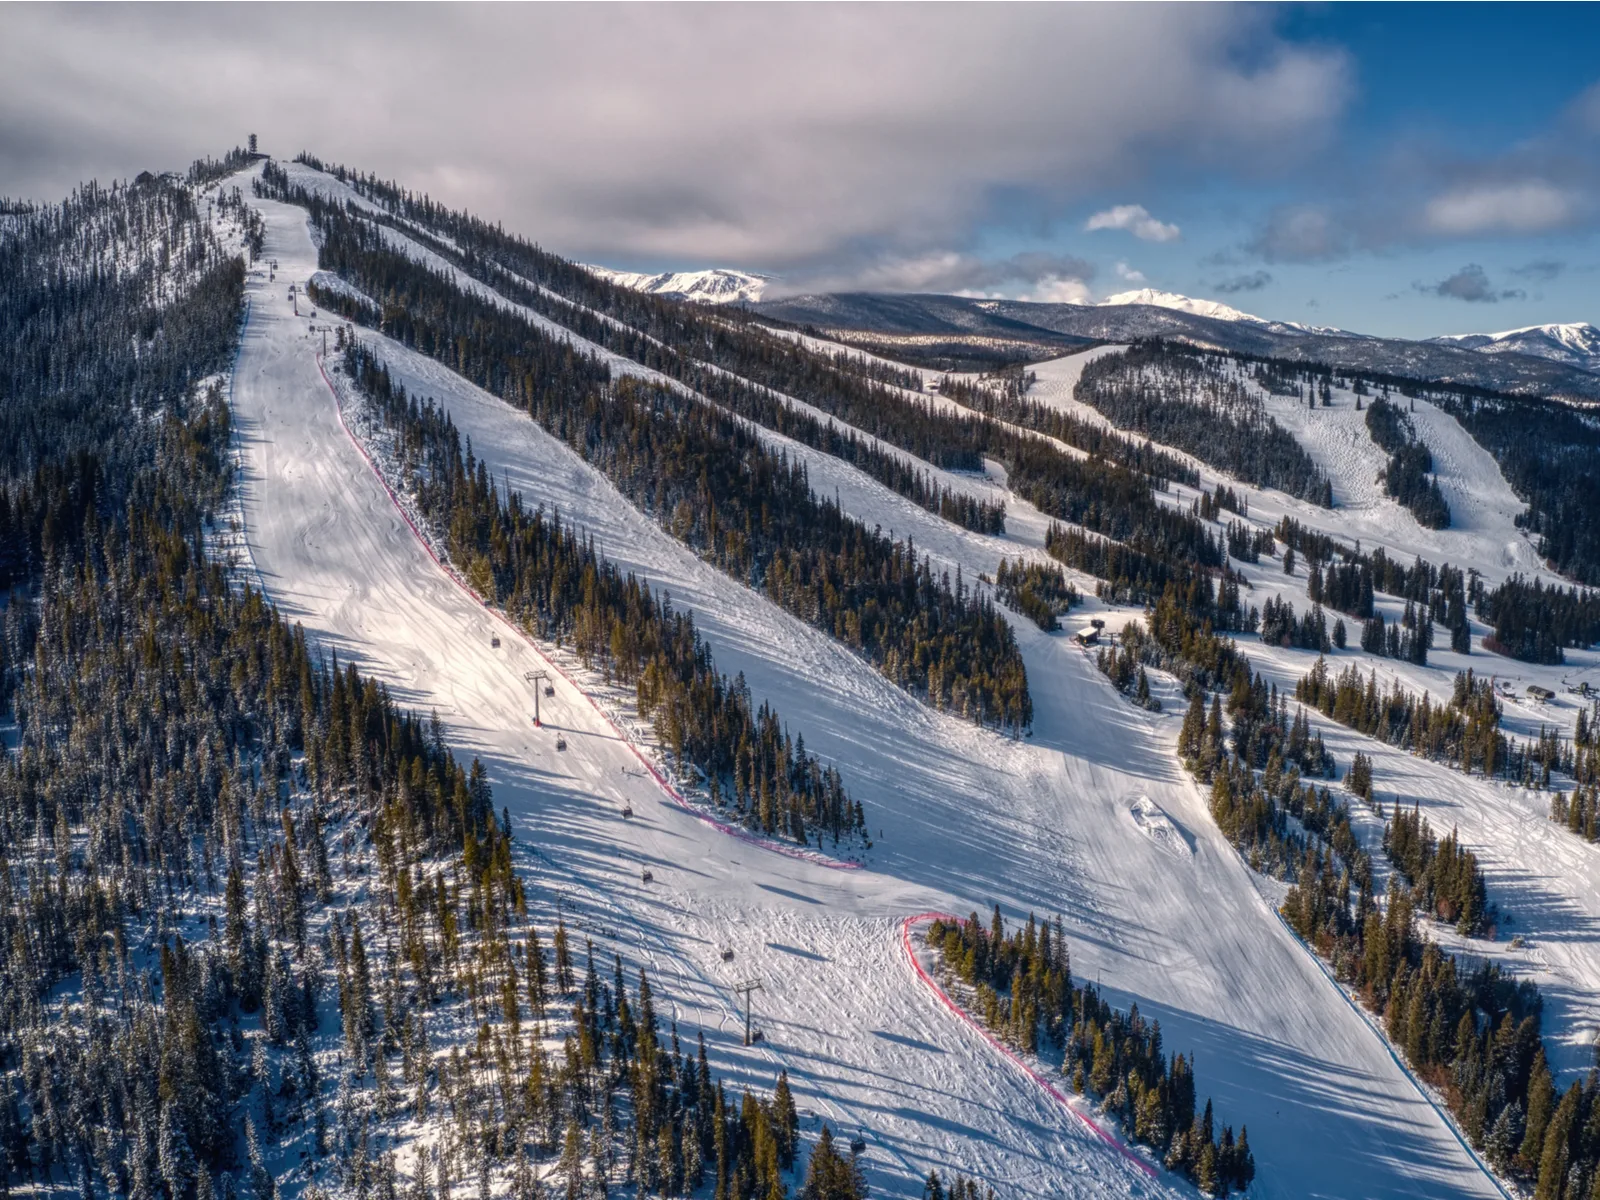 Aerial view of the slopes and ski spots at one of the best ski resorts near Denver, Winter Park Resort